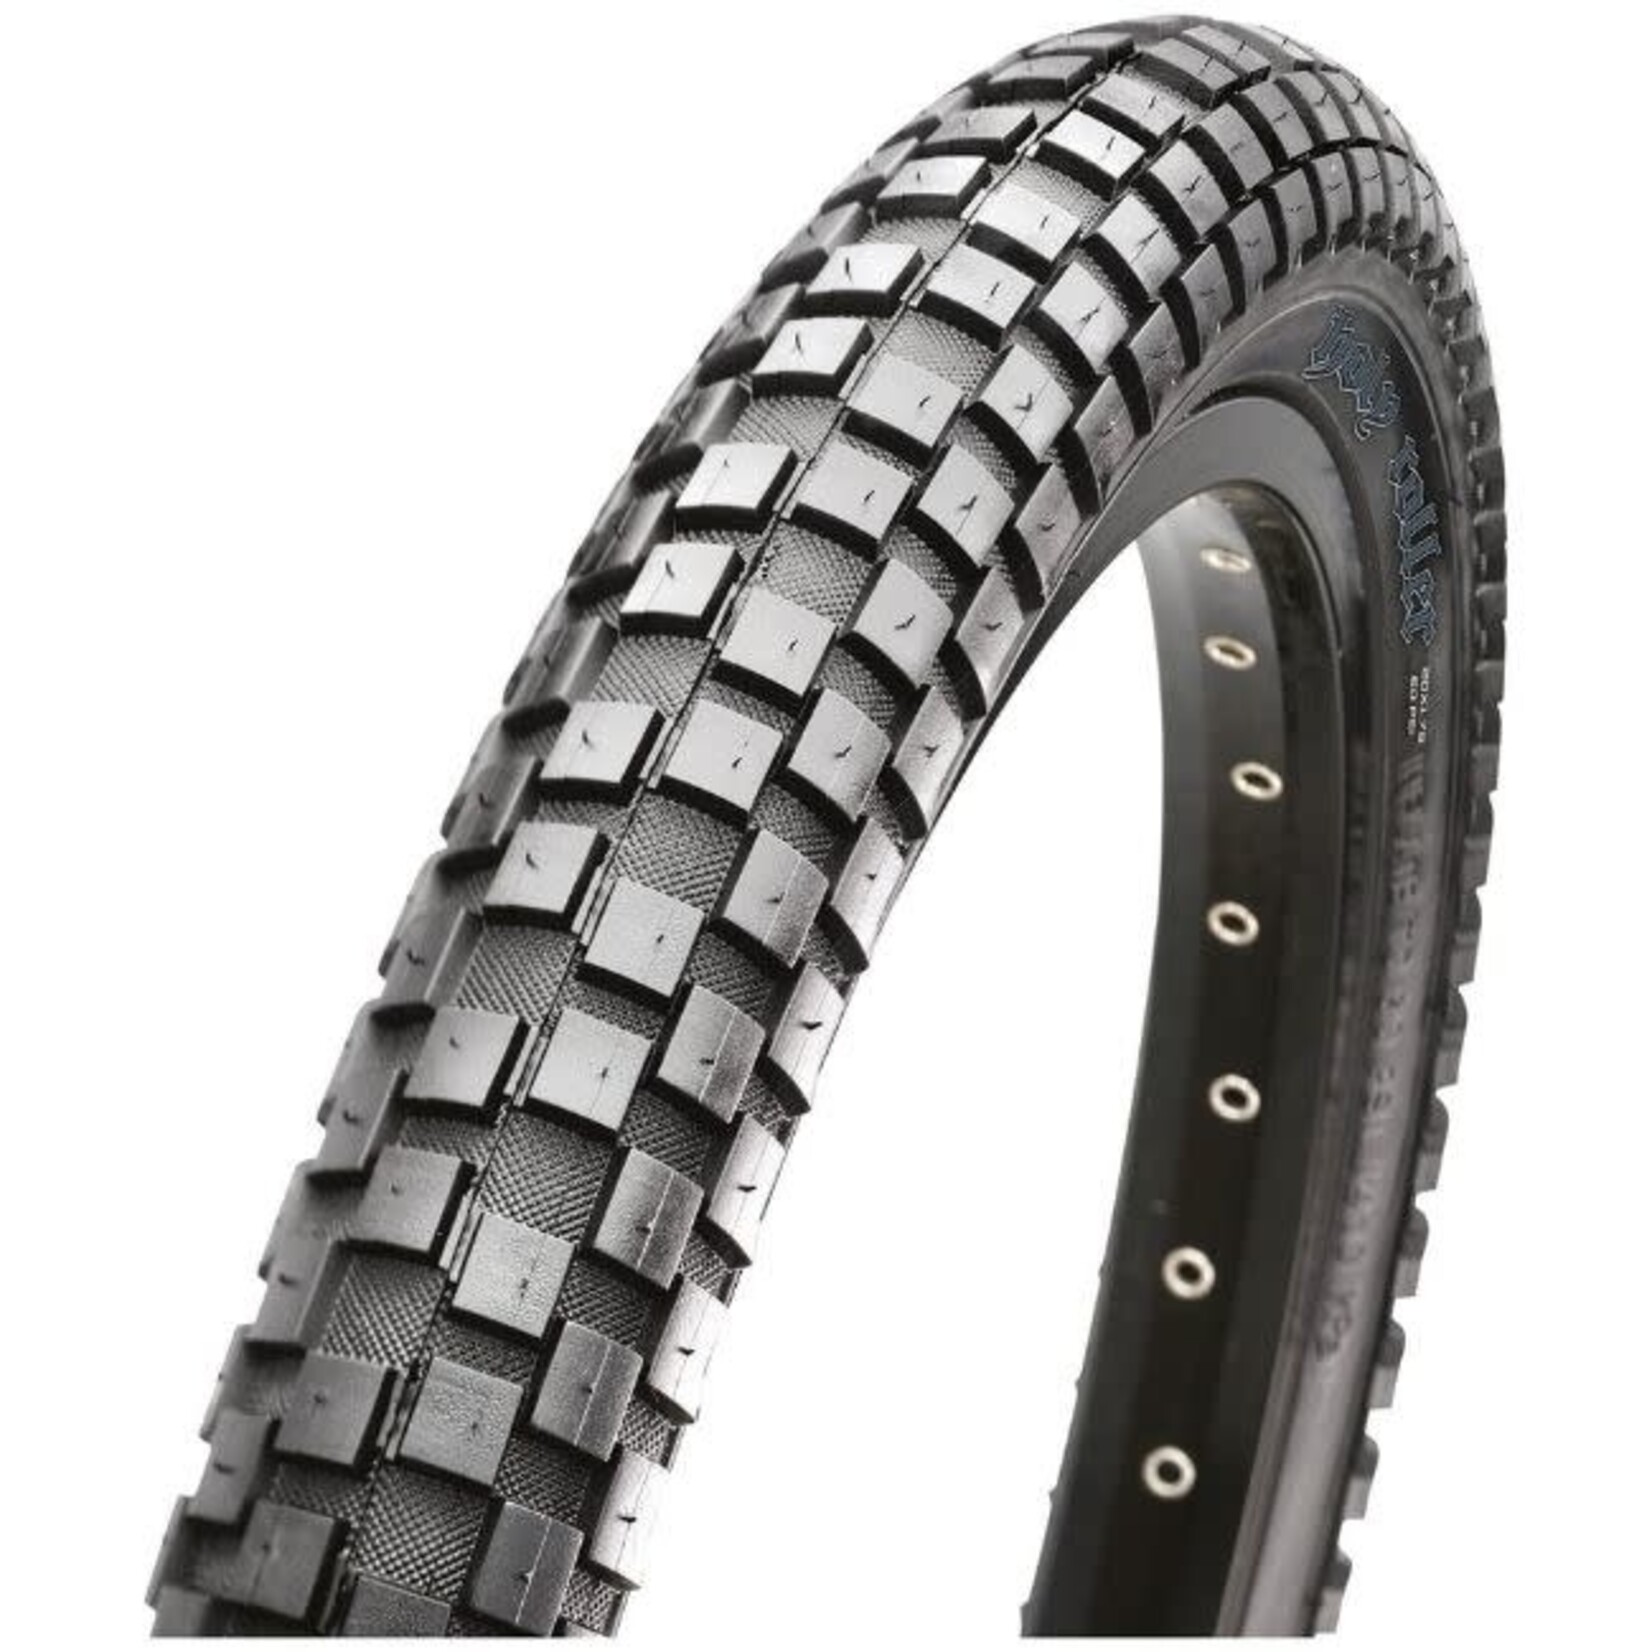 Maxxis Maxxis Holy Roller Tire - 20 x 2.2, Clincher, Wire, Black, Single